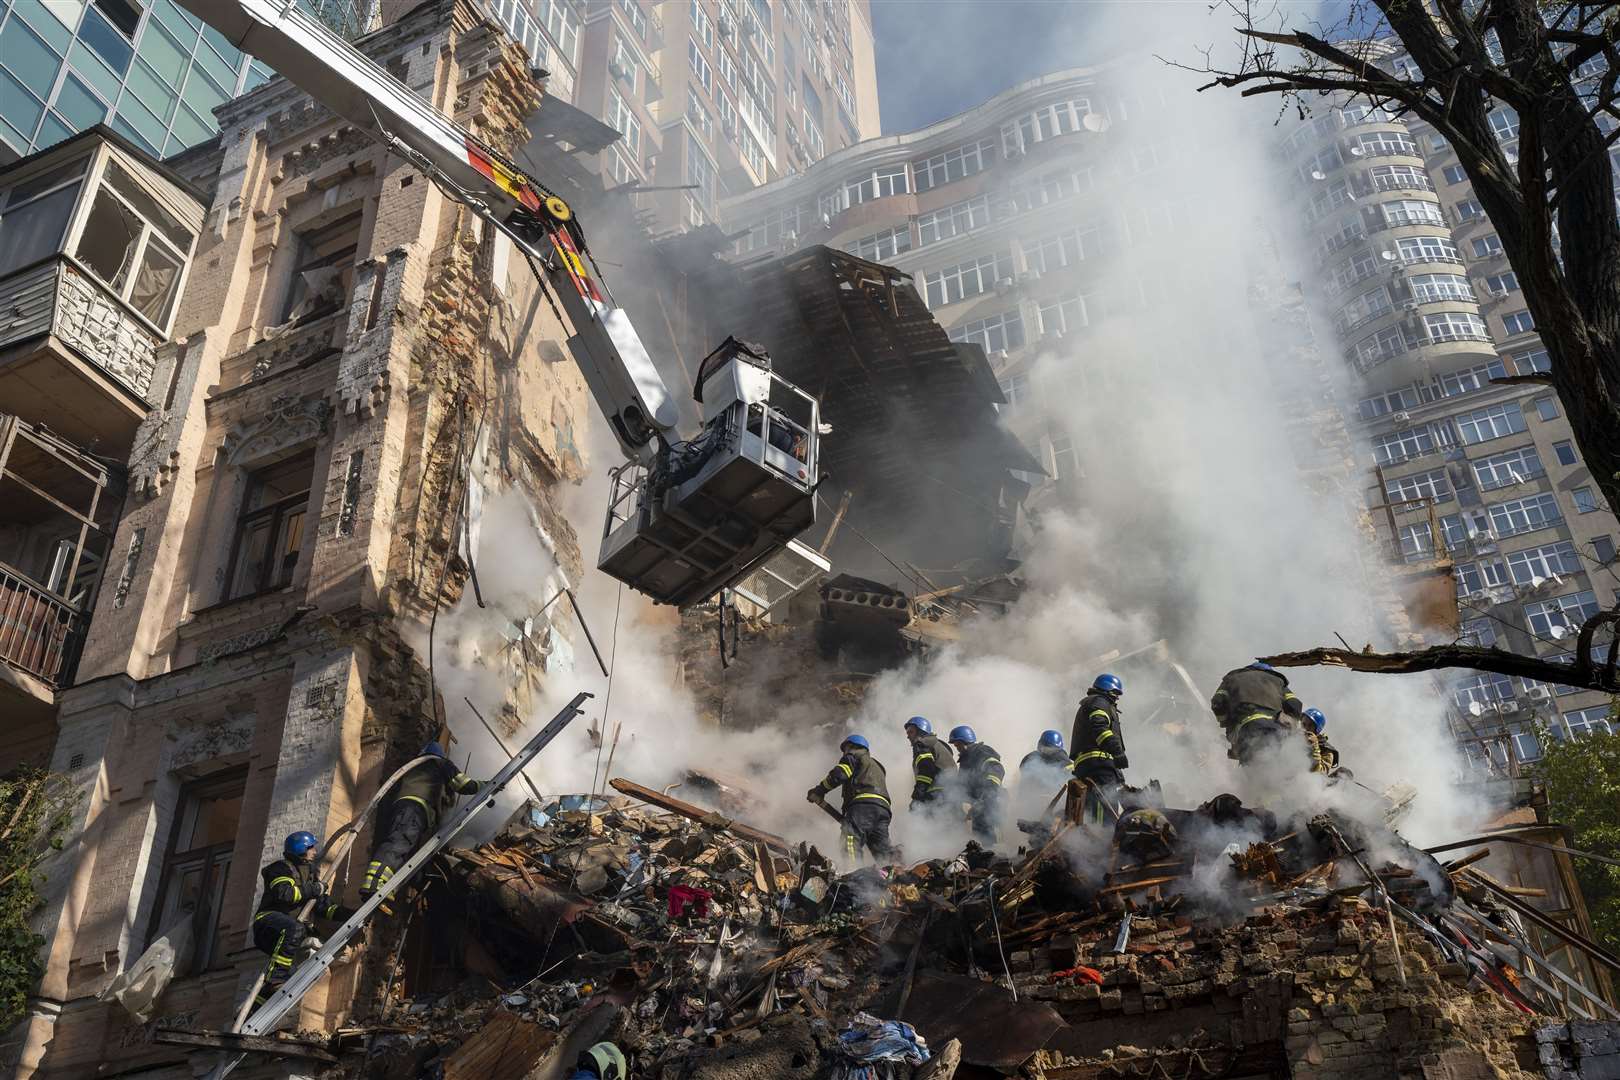 Firefighters at work after a drone attack on buildings in Kyiv, Ukraine (Roman Hrytsyna/AP)